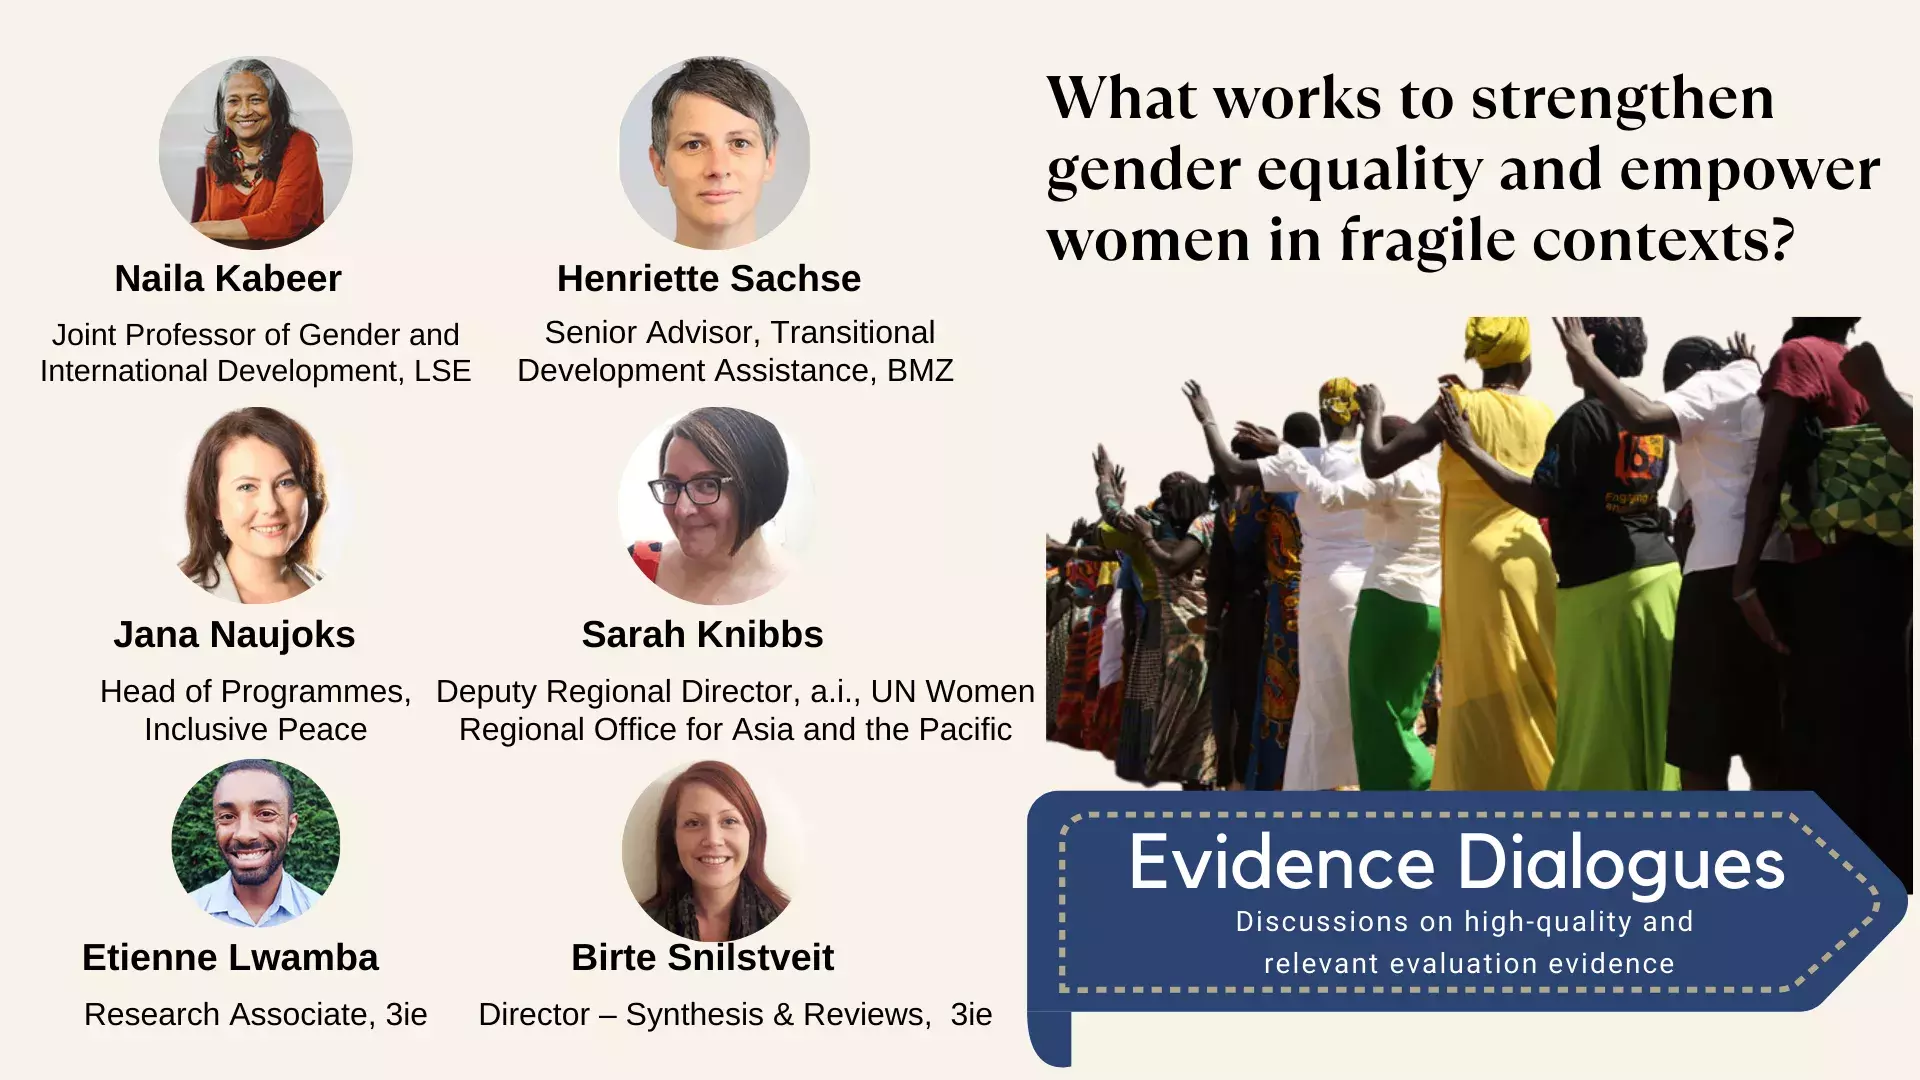 Evidence Dialogues |  What works to strengthen gender equality and empower women in fragile contexts?